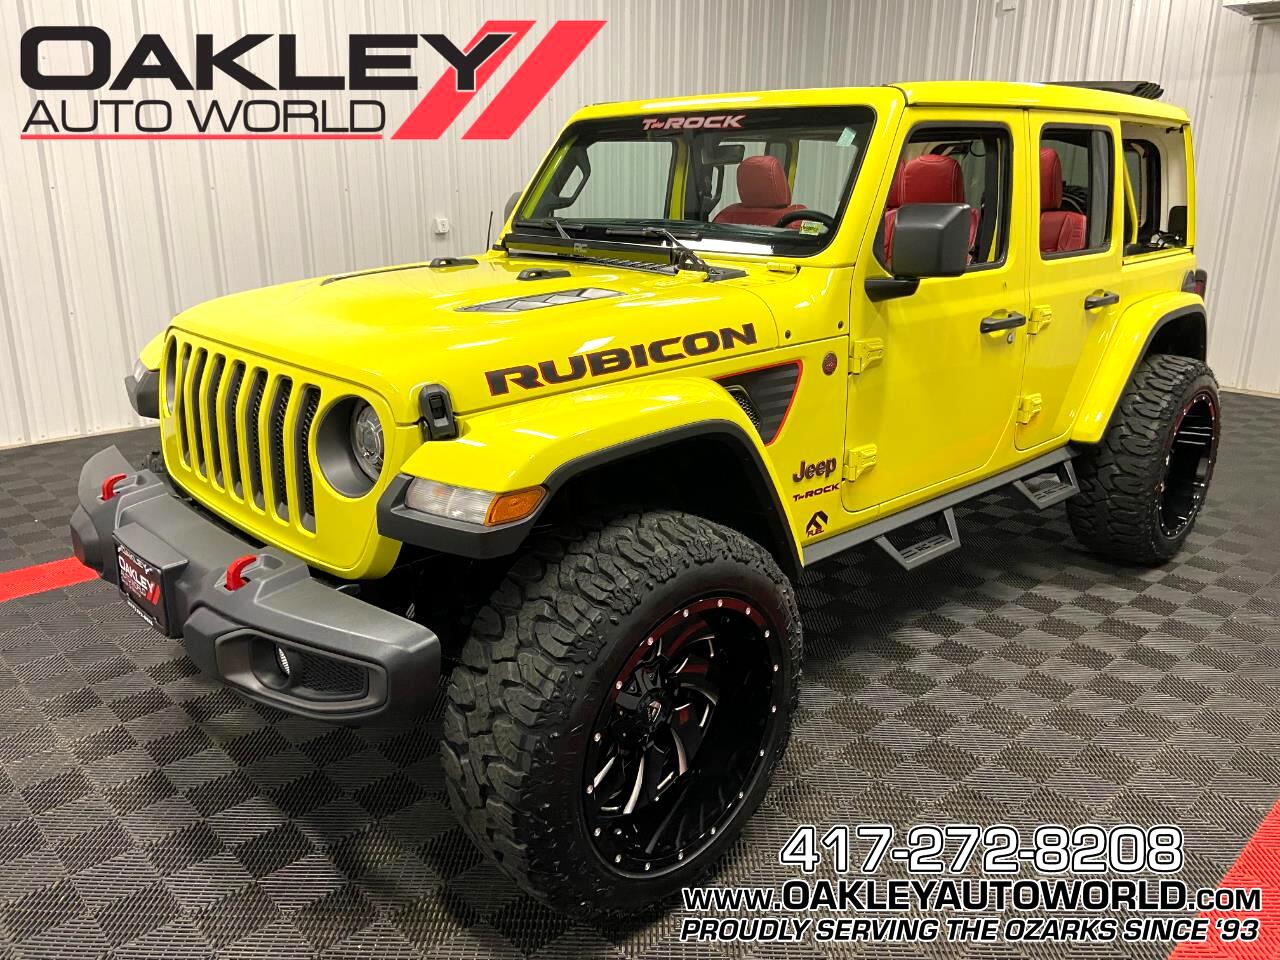 Used 2022 Jeep Wrangler T-ROCK 1 Touch Sky Power Top Unlimited Rubicon 4x4  for Sale in Branson West MO 65737 Oakley Auto World